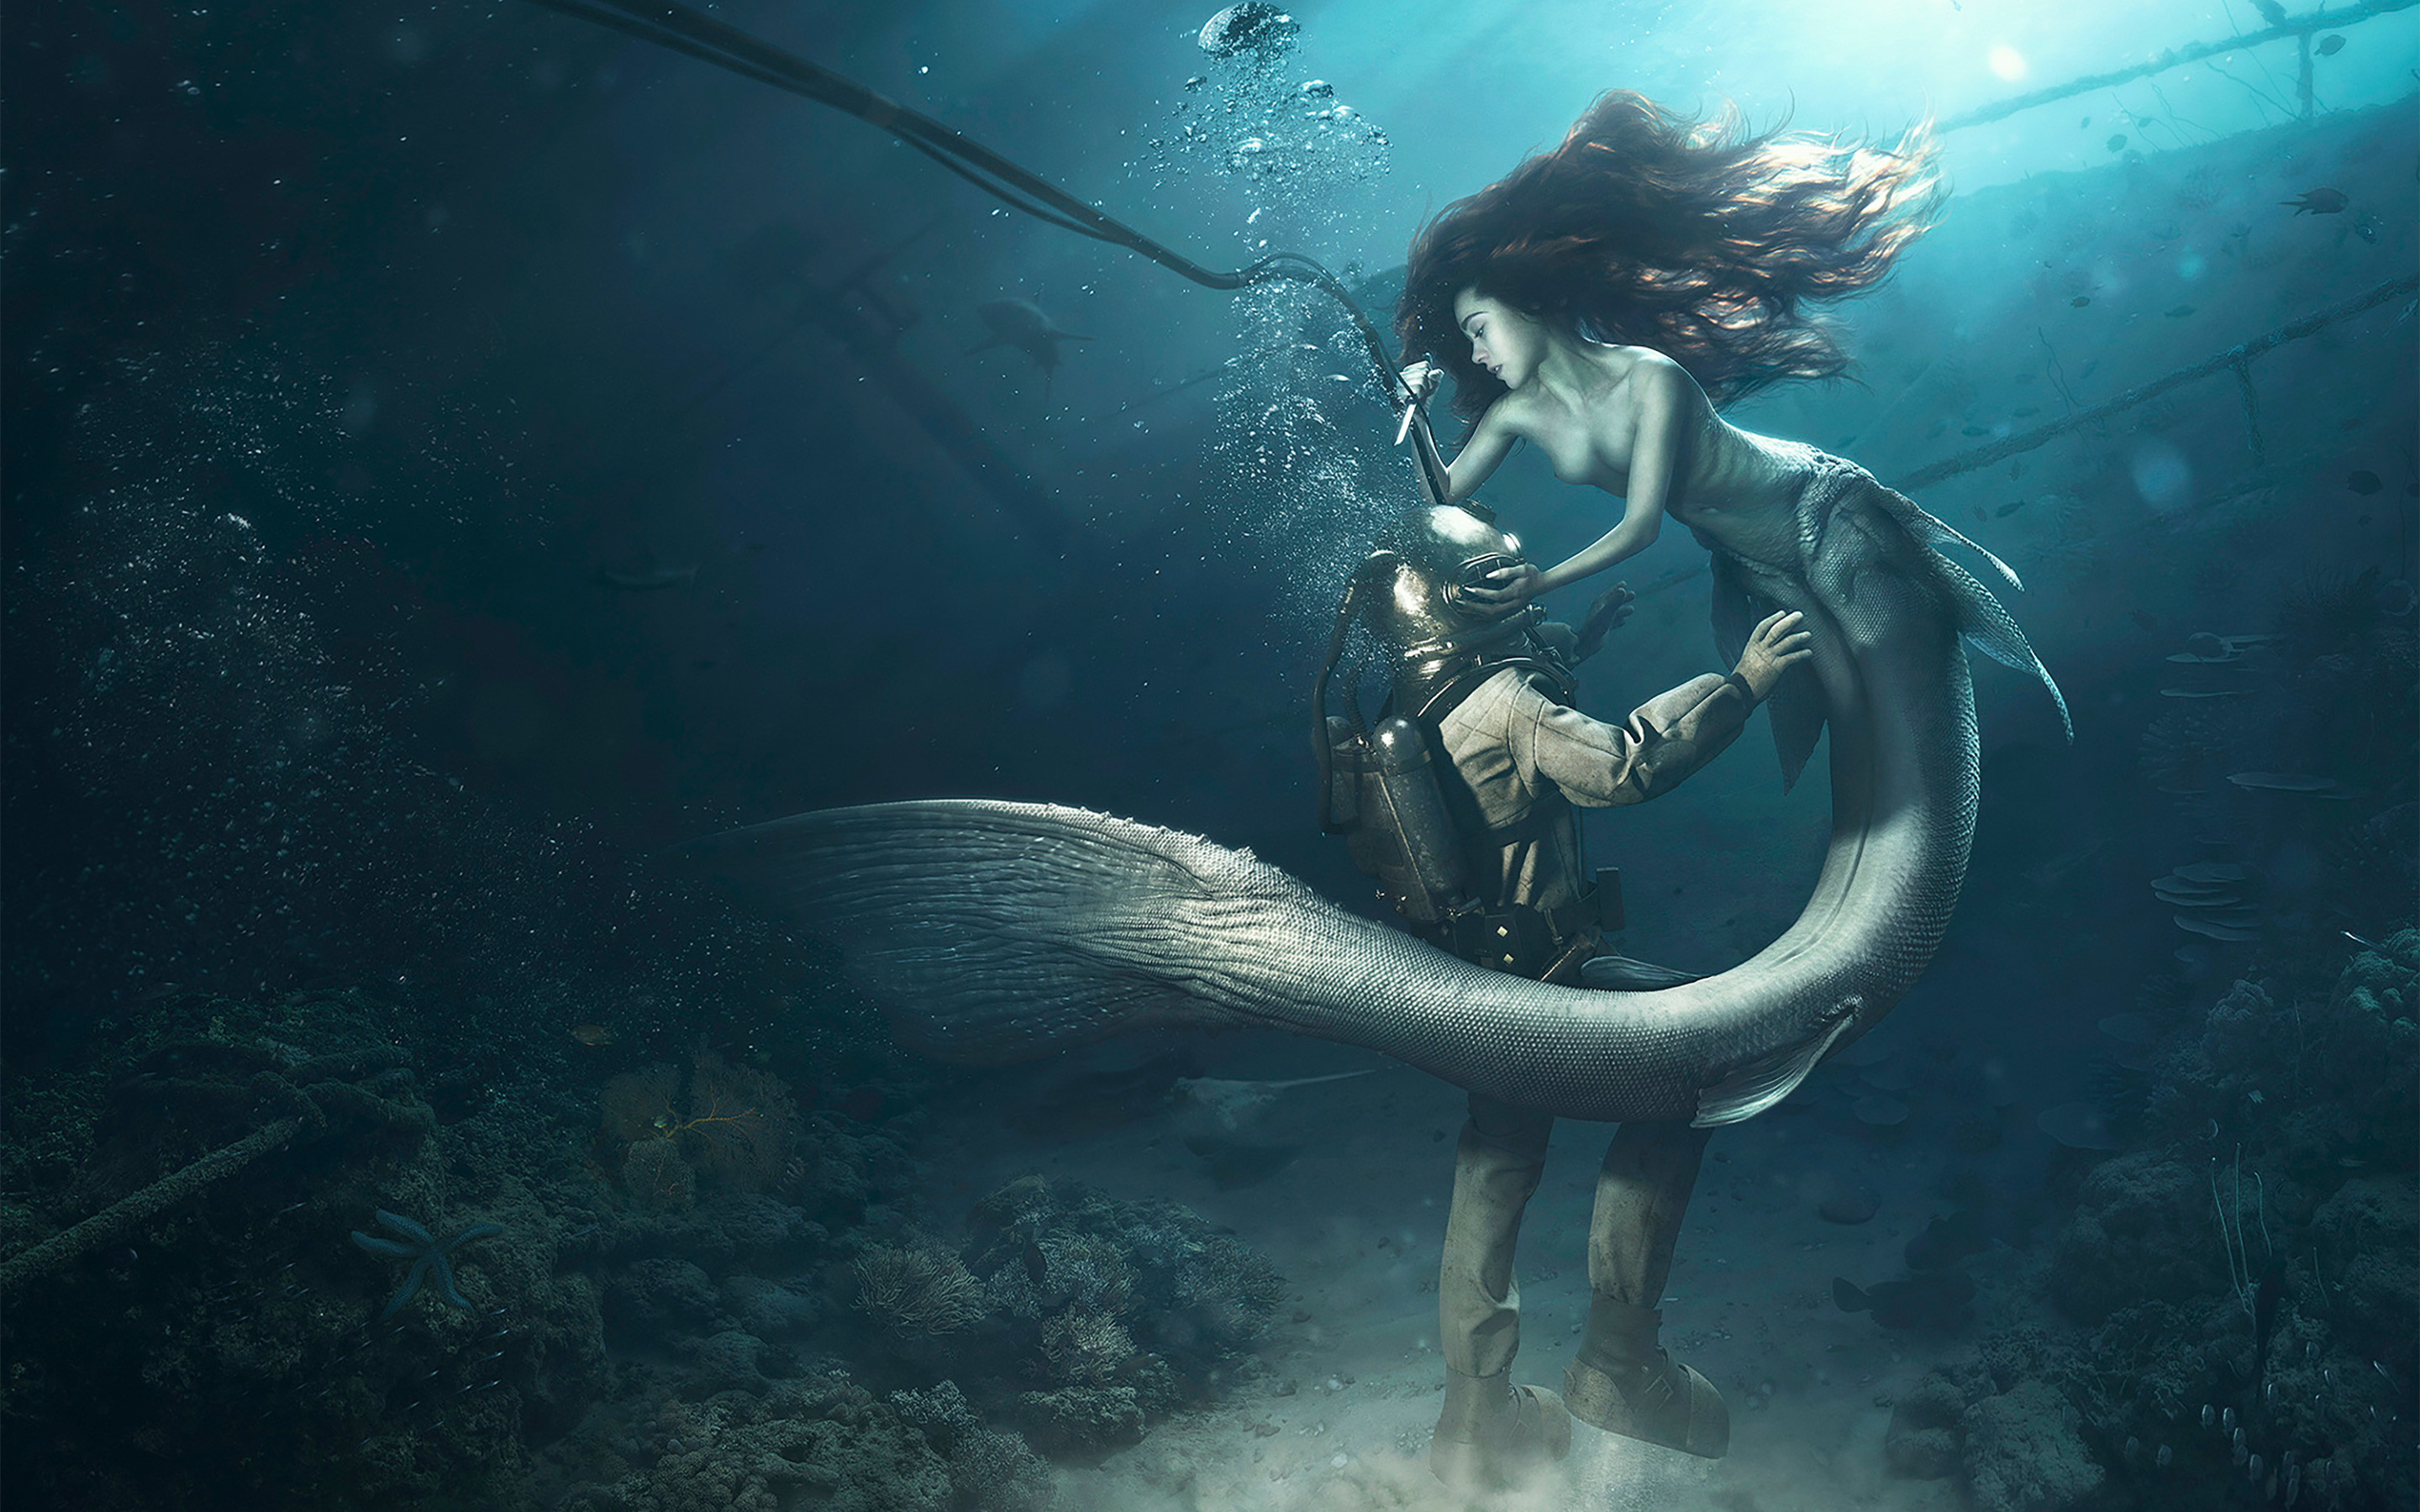 Diver and the Mermaid